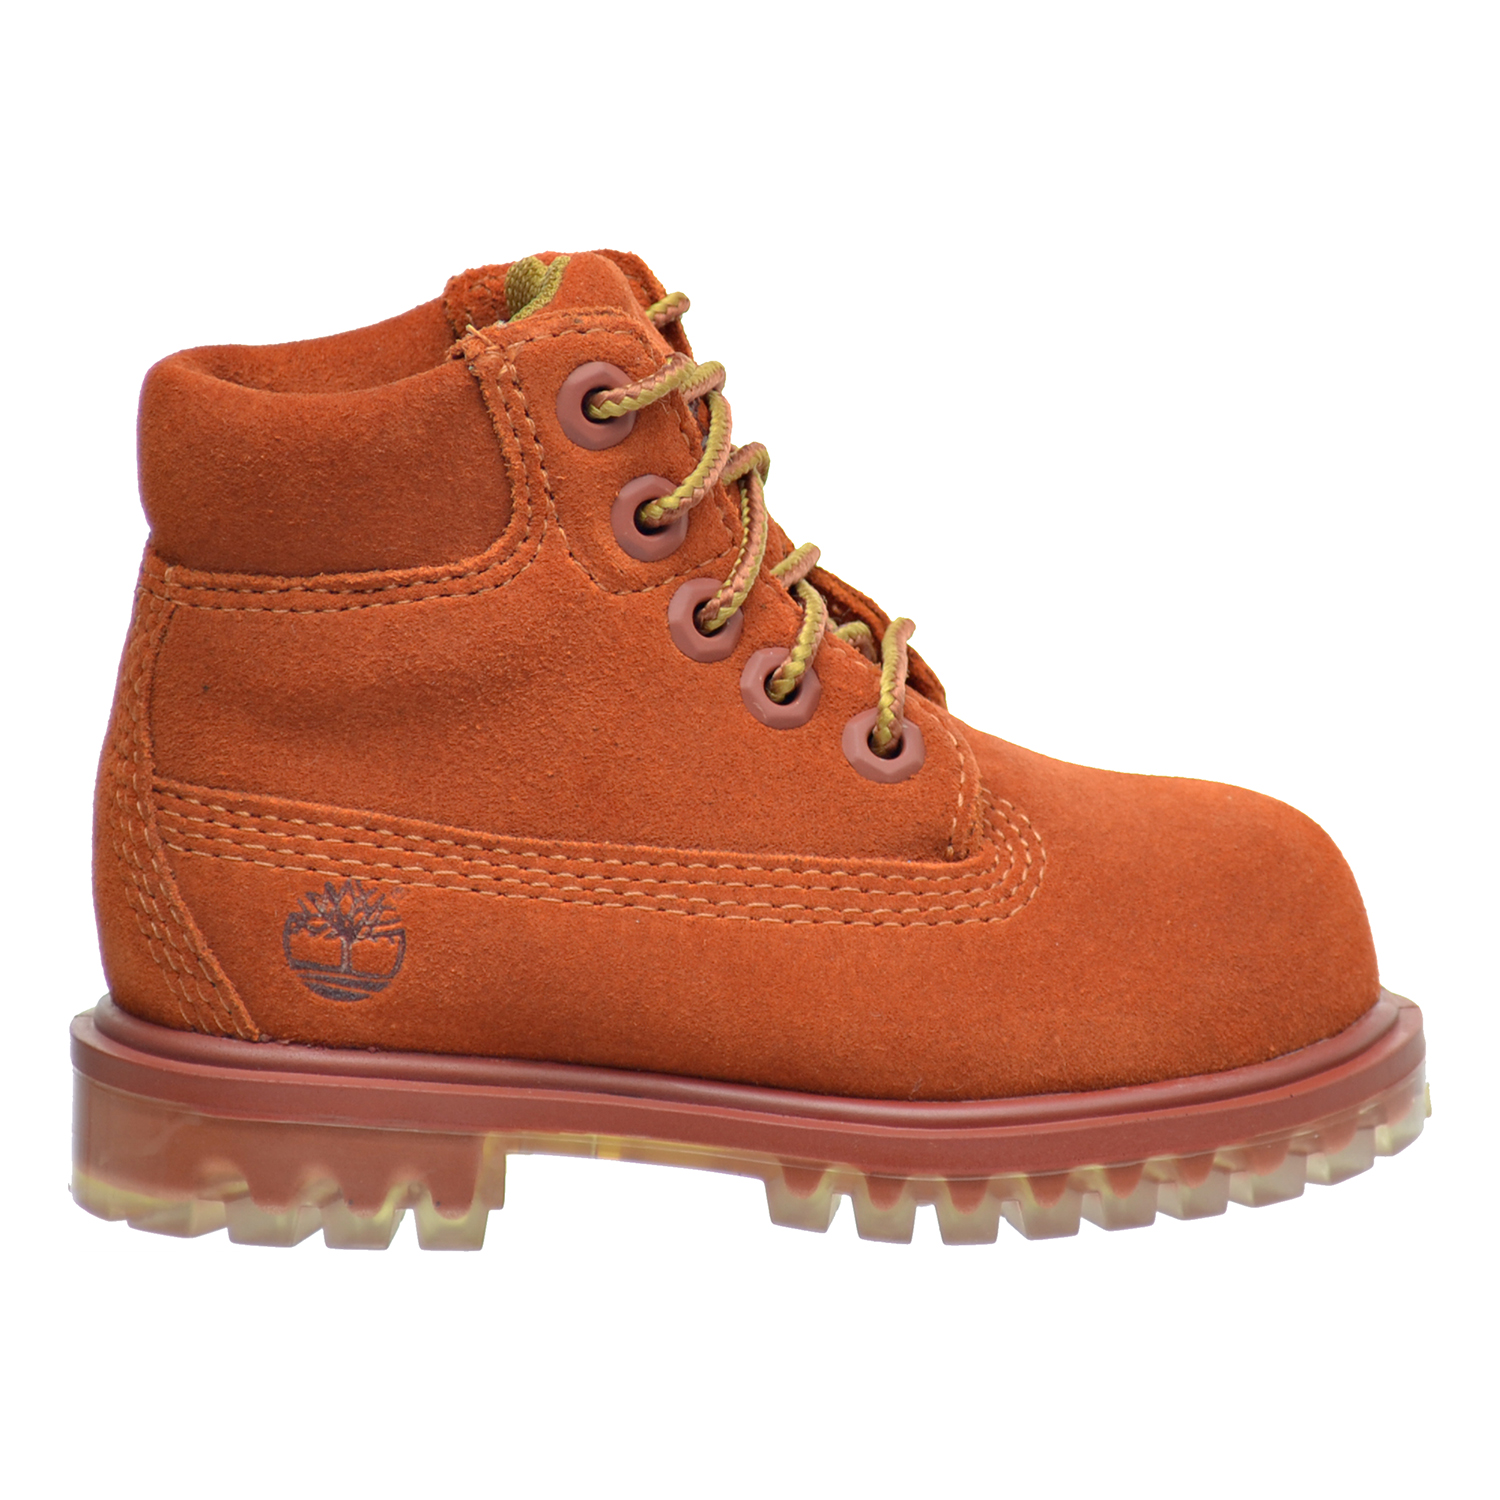 Timberland 6 Inch Water Proof Suede Premium Toddler's Boots Rust tb0a1blq | eBay